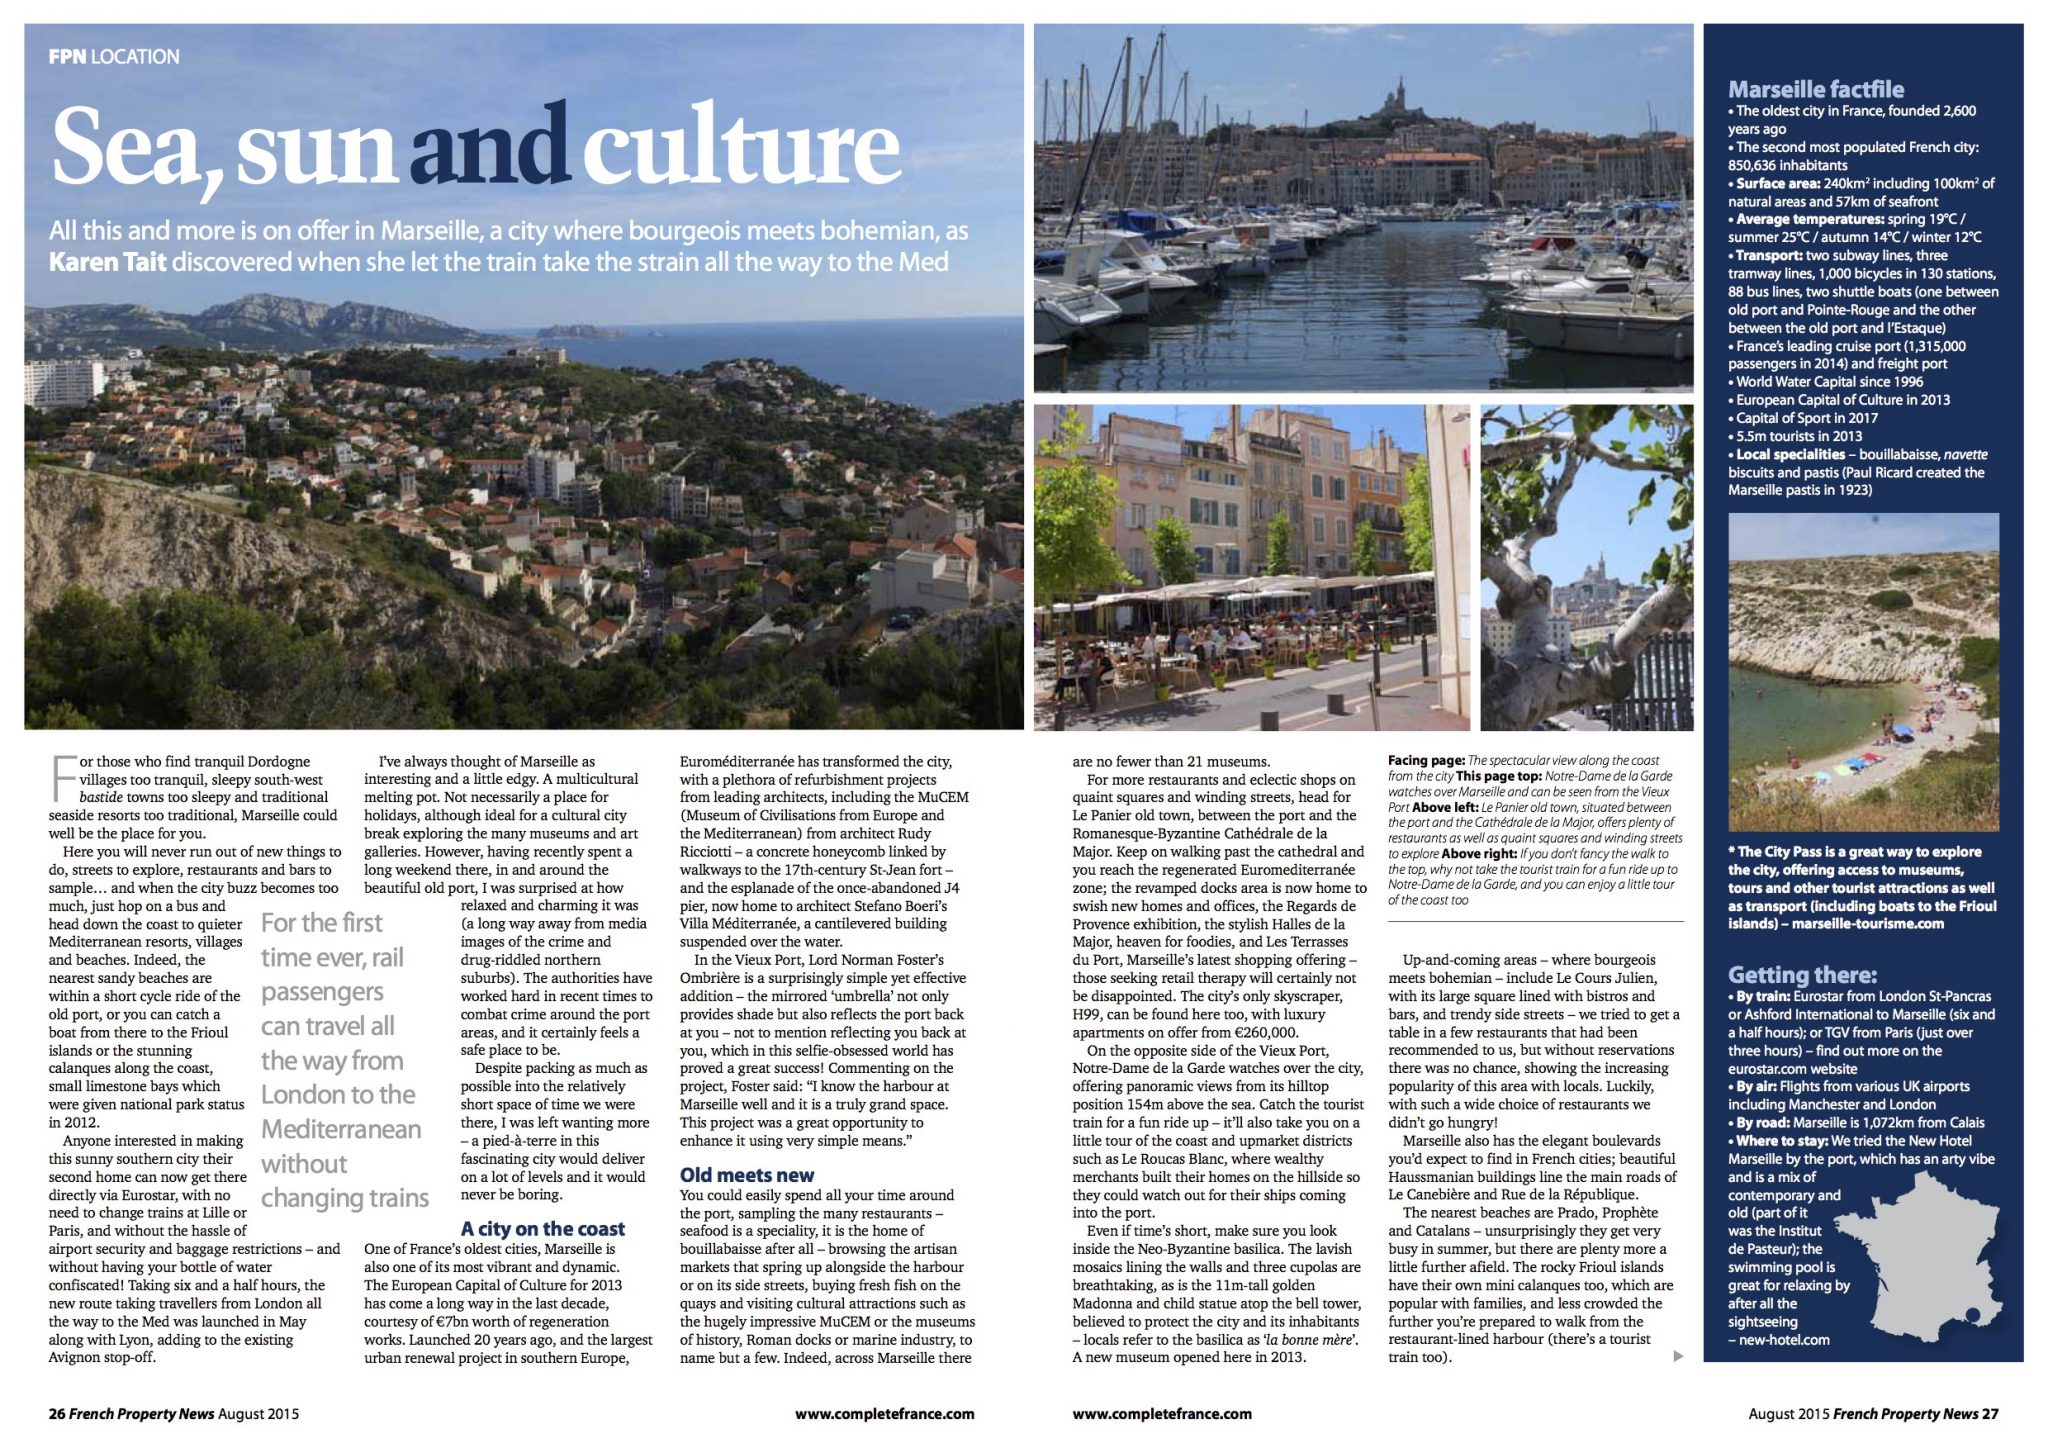 French Property News – Sun, sea and culture – A focus on Marseille